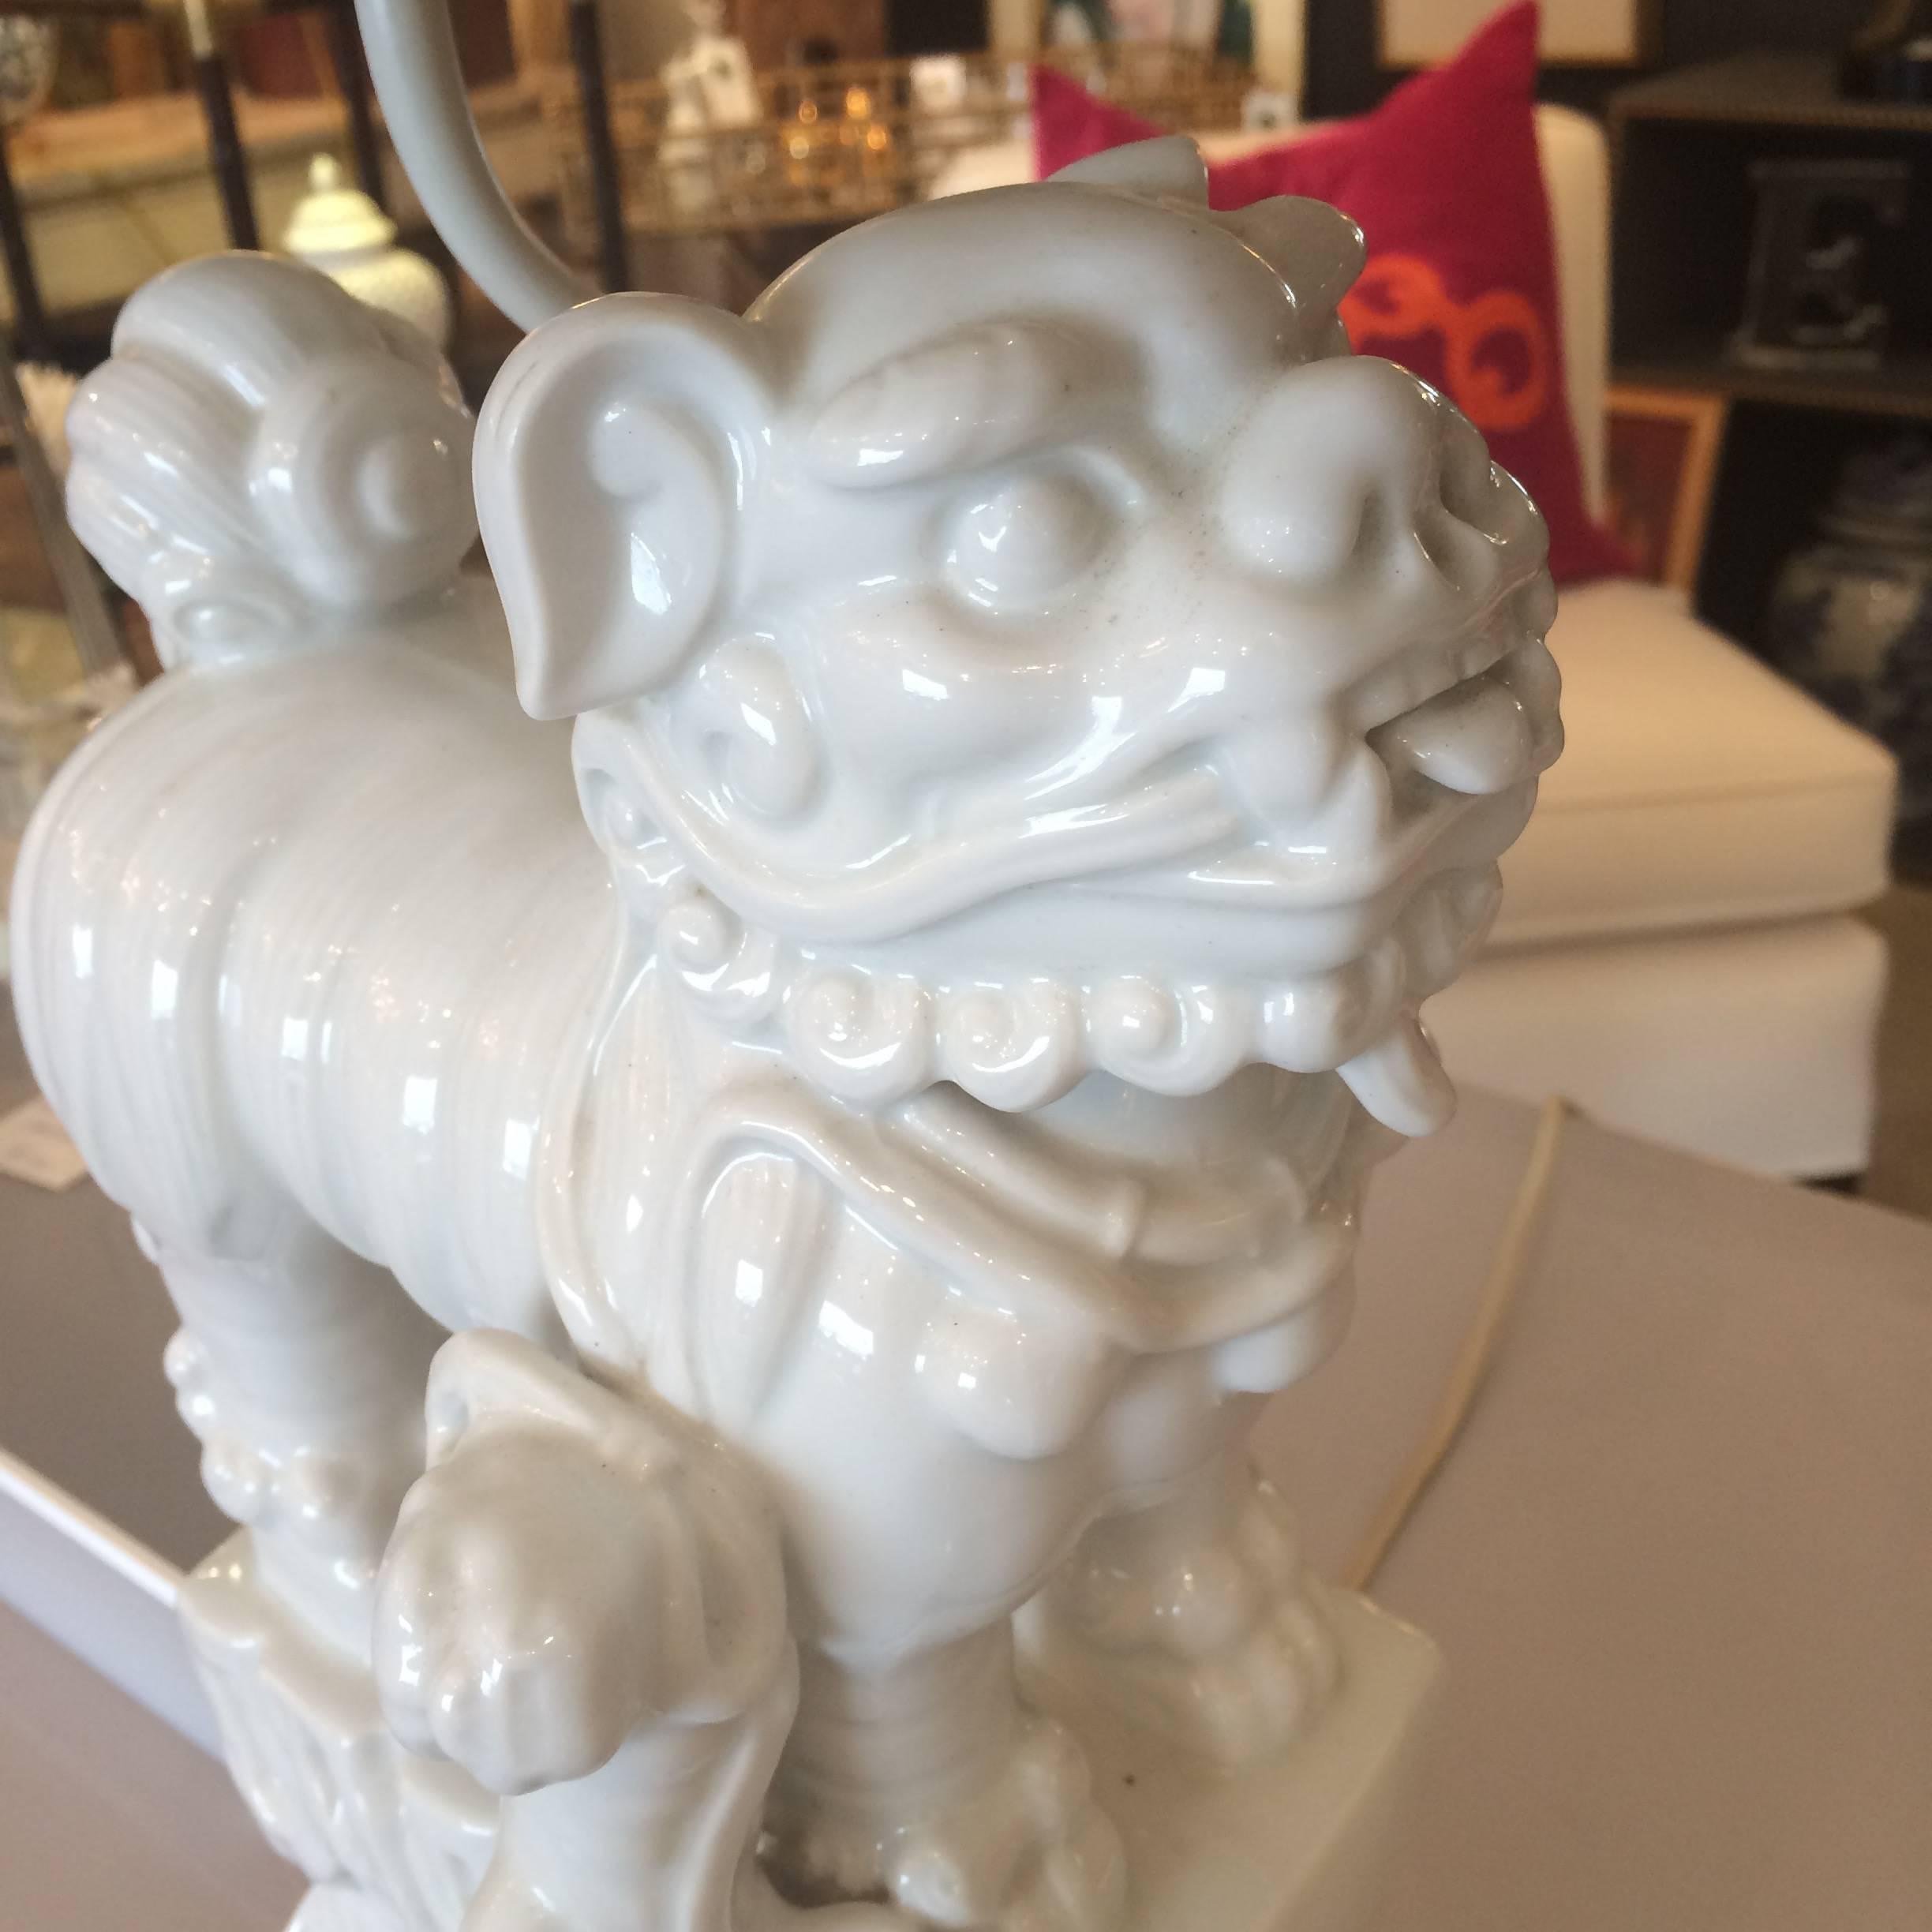 Two super stylish white porcelain foo dog sculptural lamps with fabulous ornately pleated custom shades in a multi-patterned black, taupe and cream fabric. Foo dogs are 9